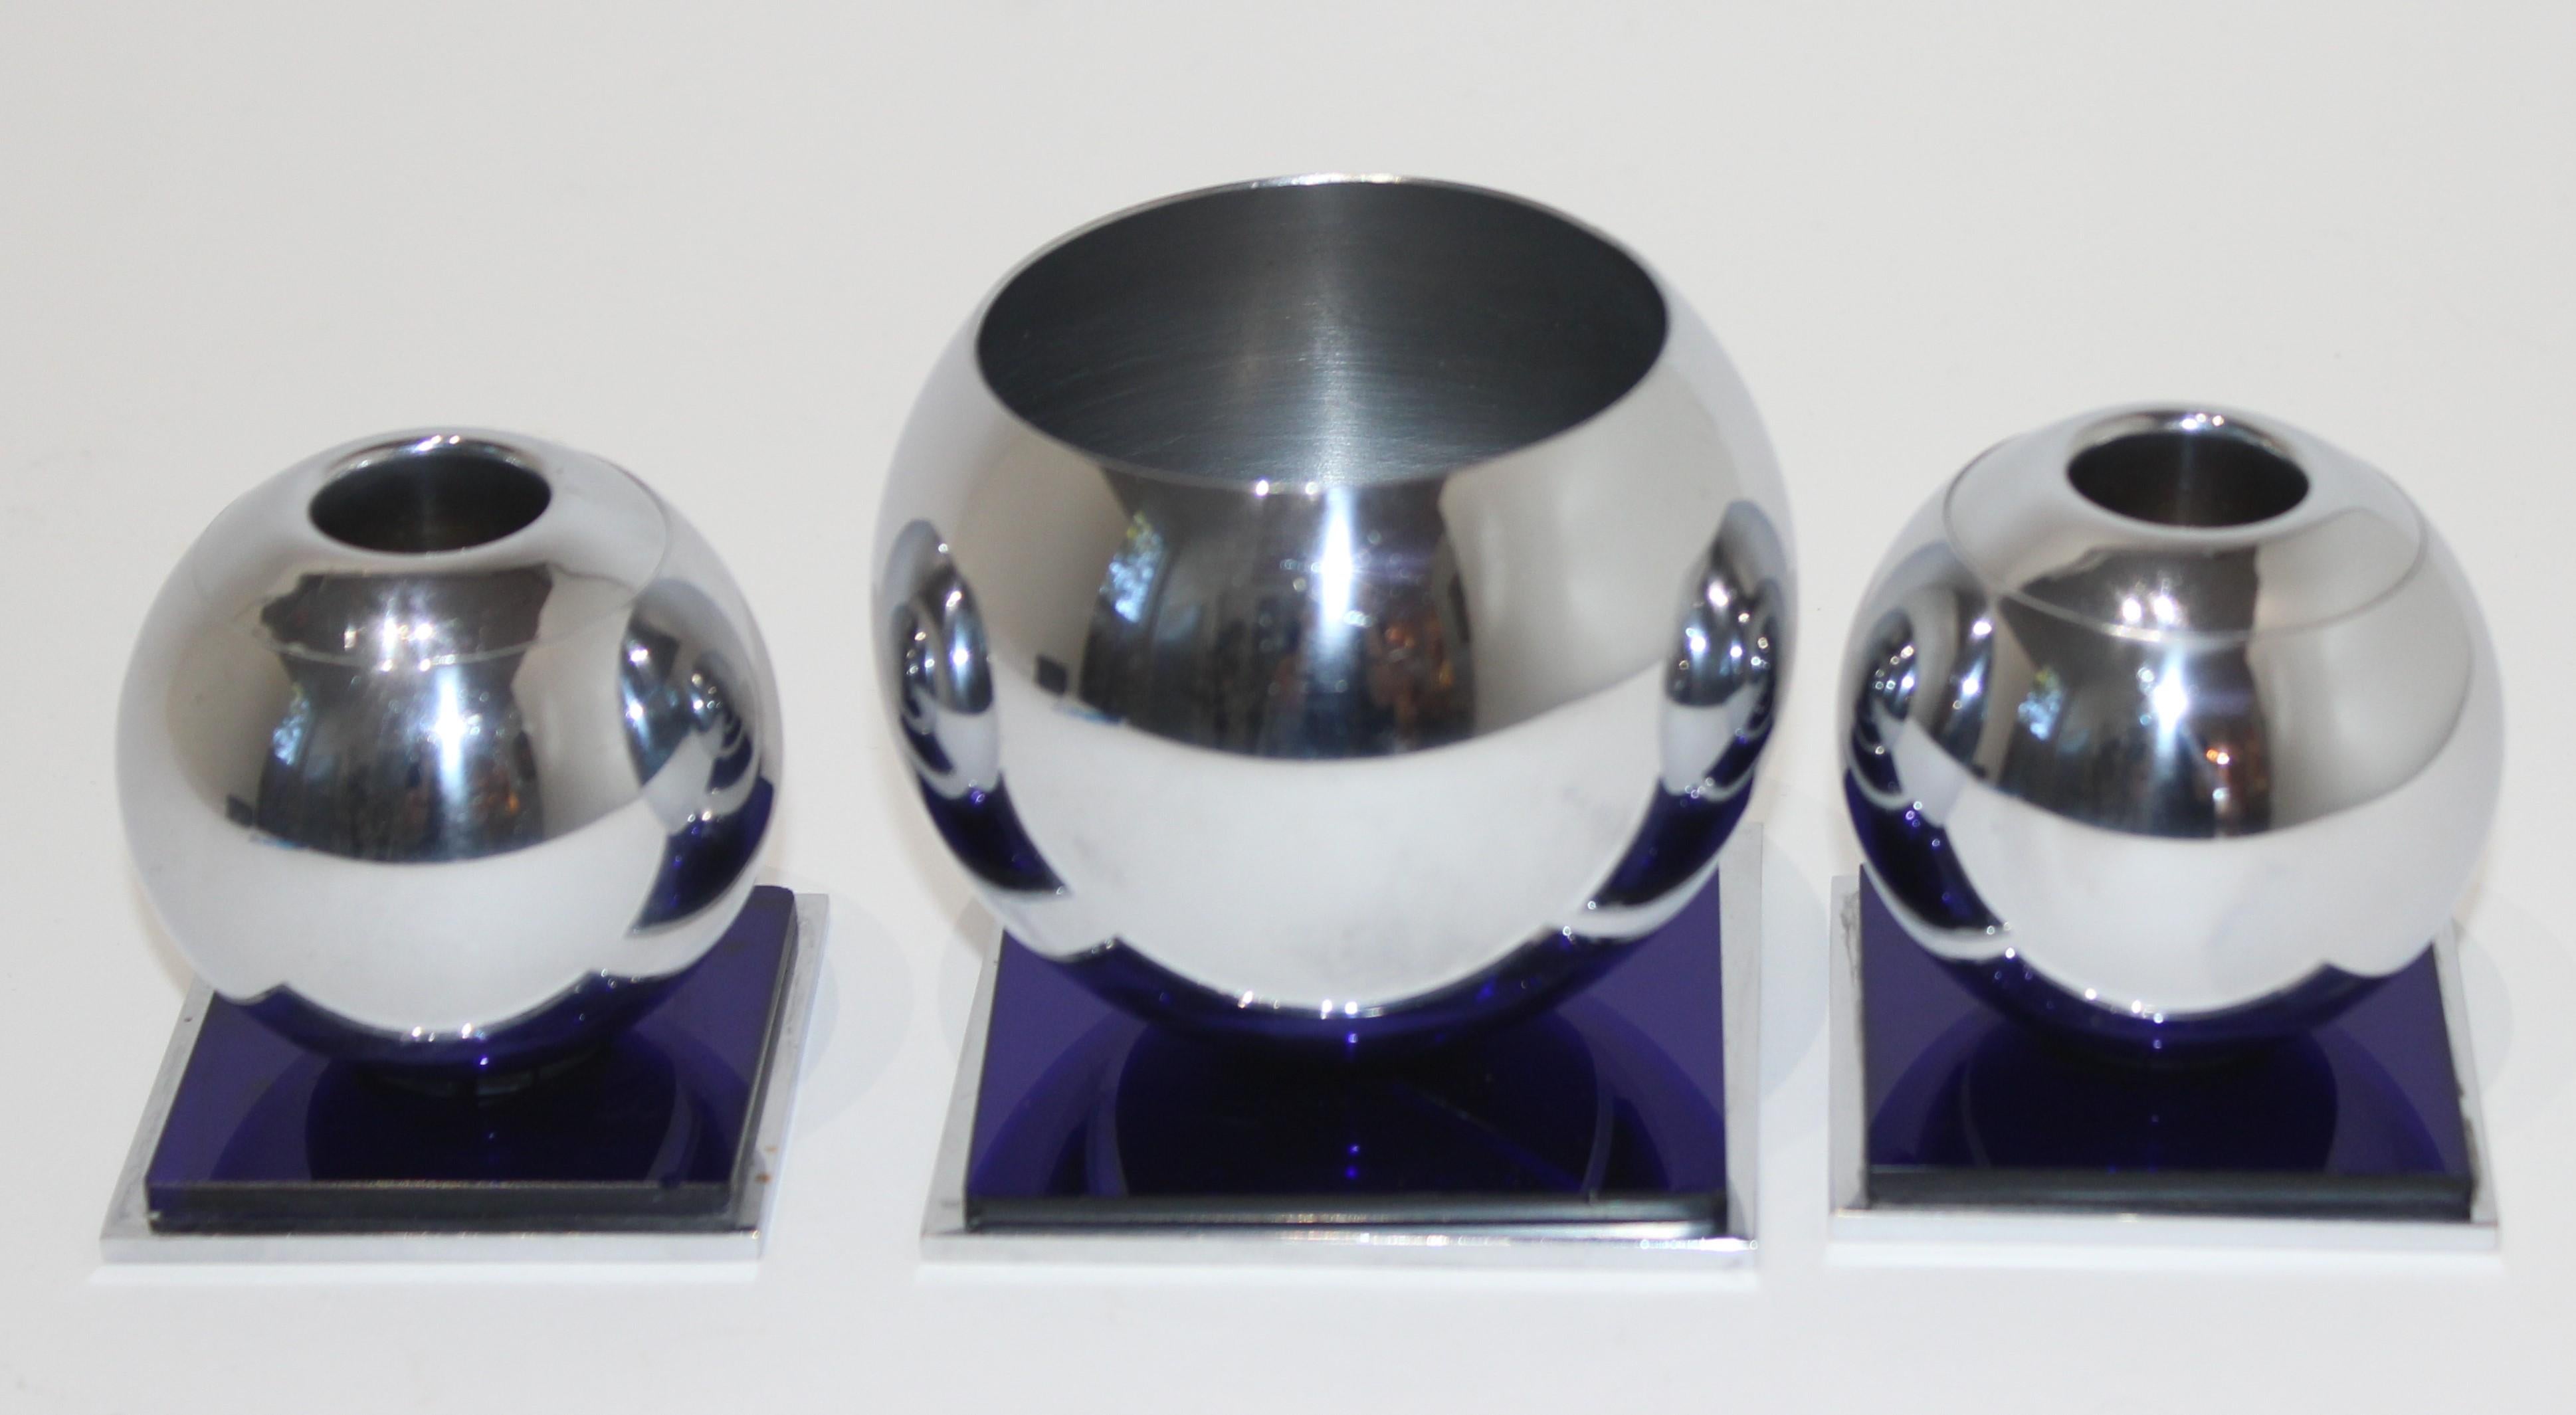 This stylish and chic three-piece American Art Deco cobalt blue and chrome candleholder and vase date to the 1930s and were created by Russel Wright for Chase USA 

Note: The height of the vase is 3.14